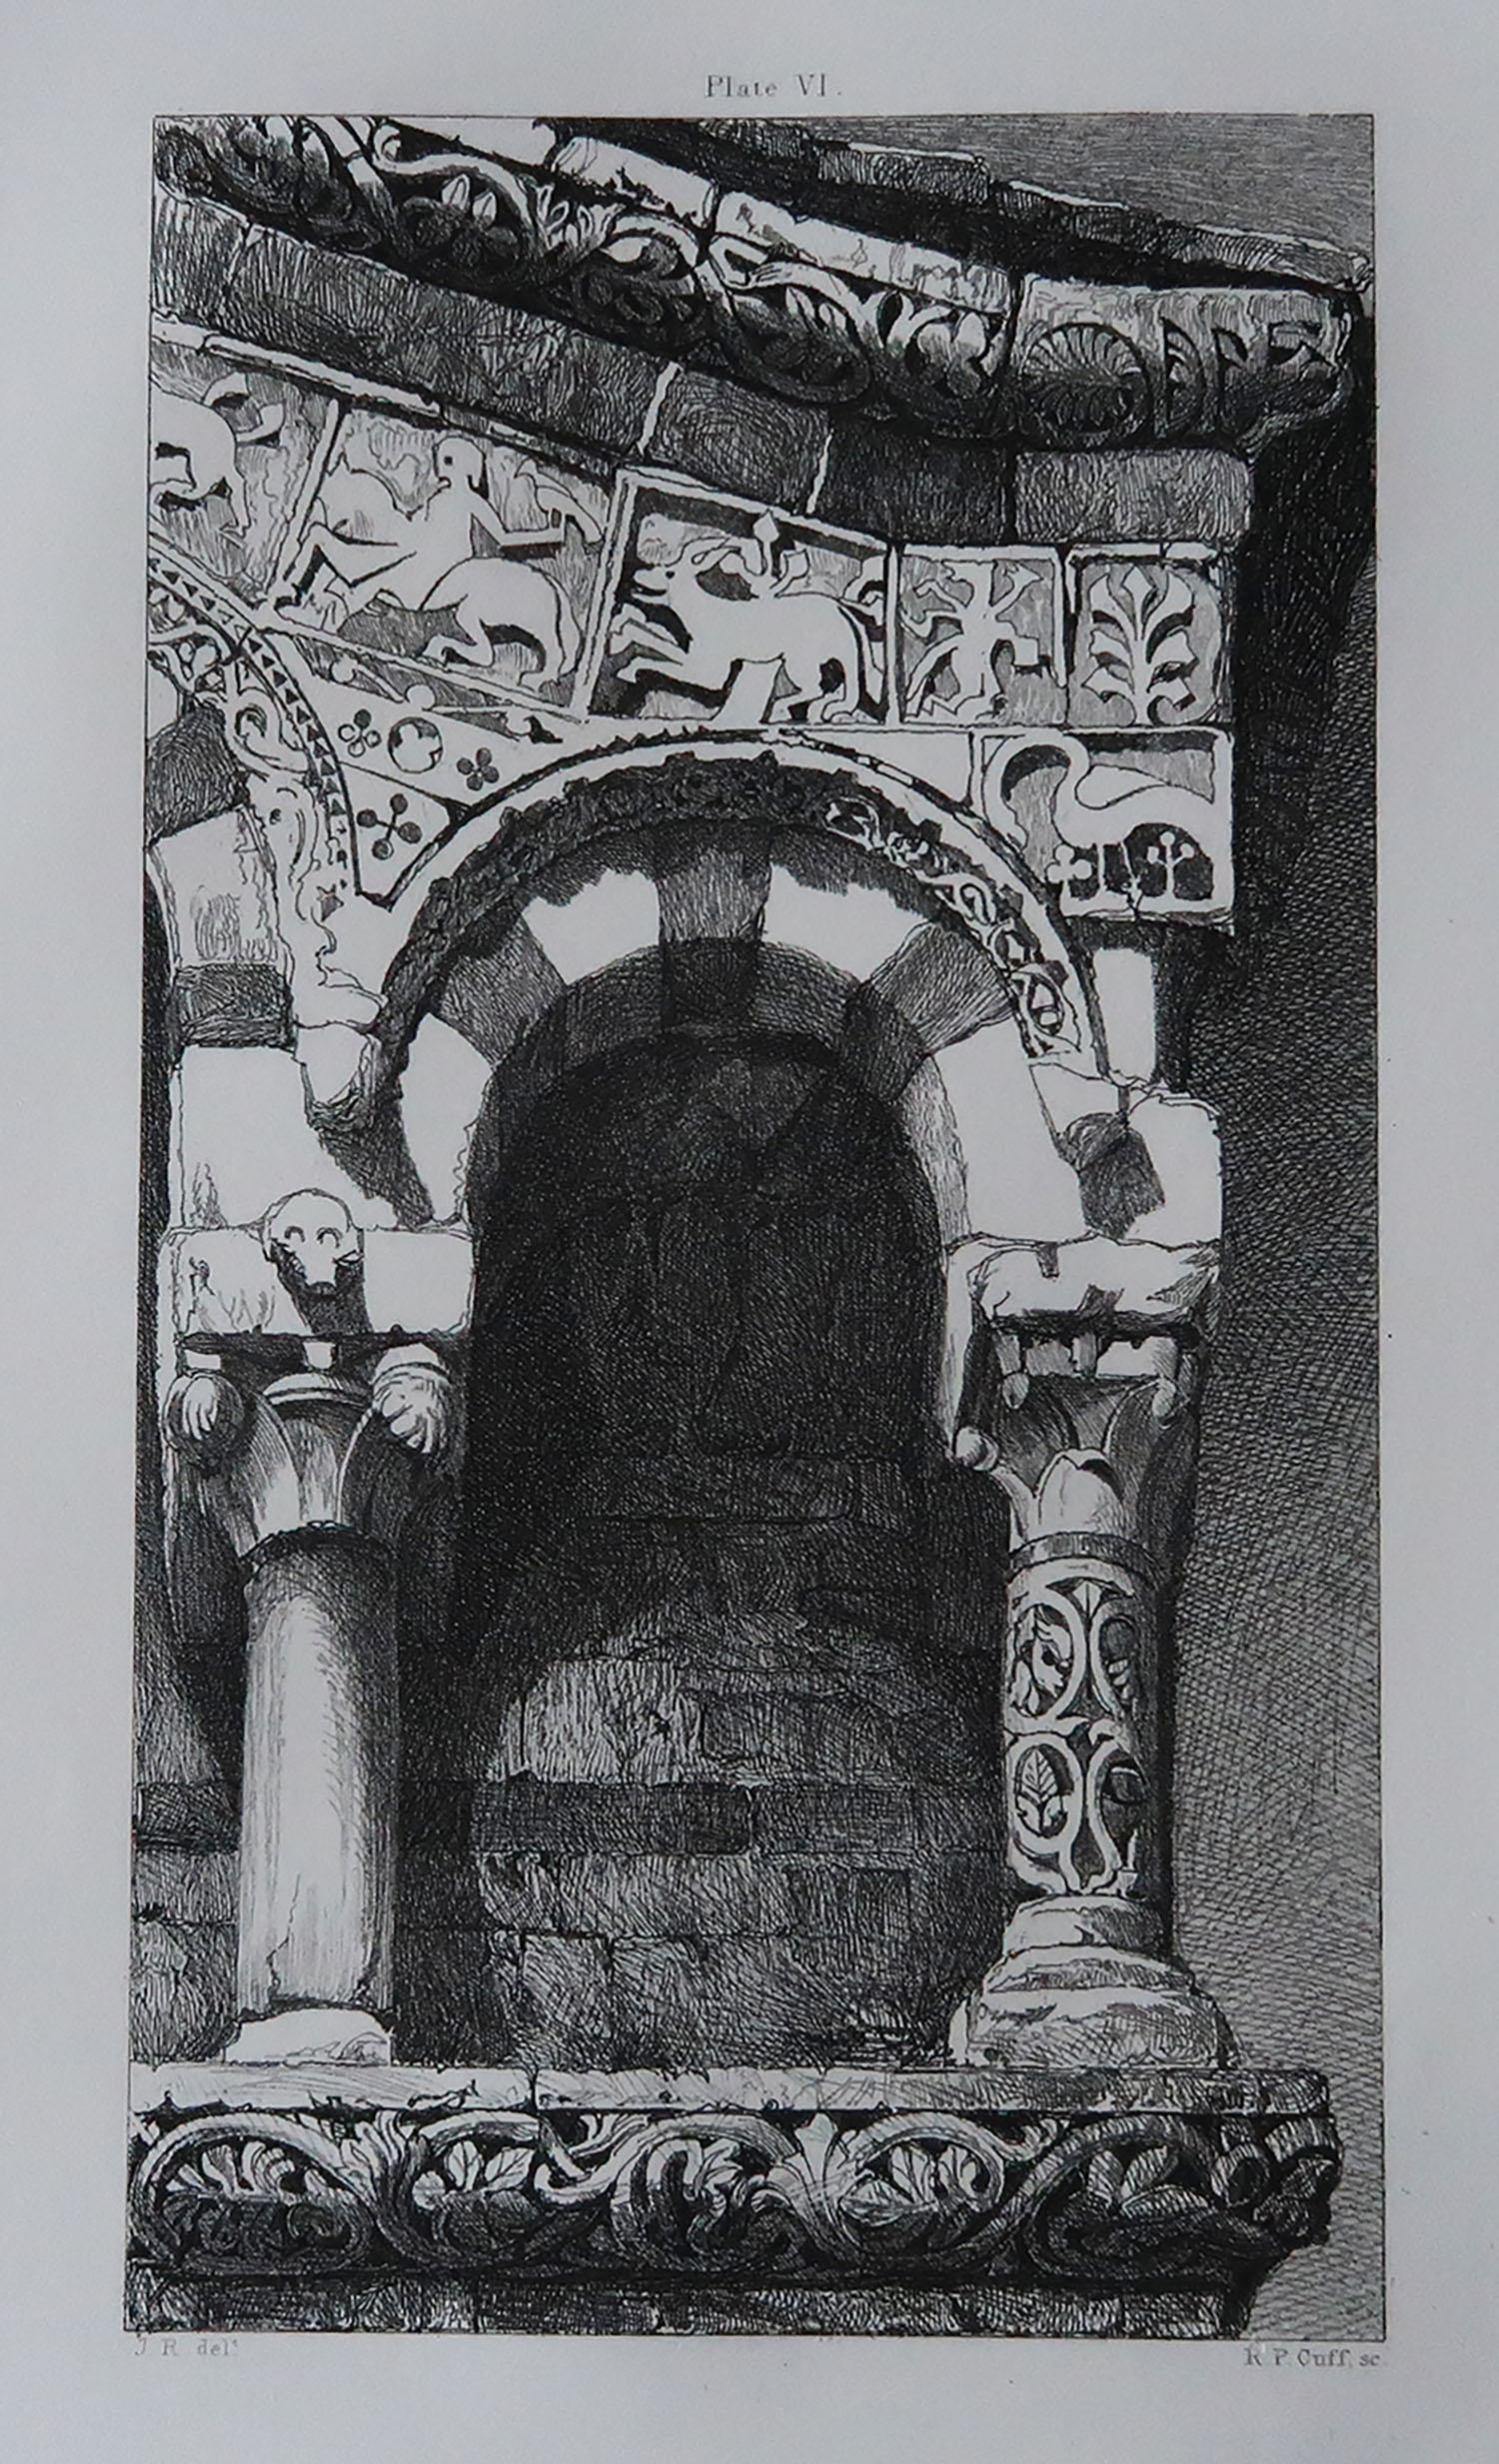 Wonderful Gothic architectural print.

Arch from The Facade of The Church of San Michele at Lucca

Steel engraving by R.P. Cuff after the original drawing by John Ruskin

Published, circa 1880

On wove quality paper
 
Unframed.


